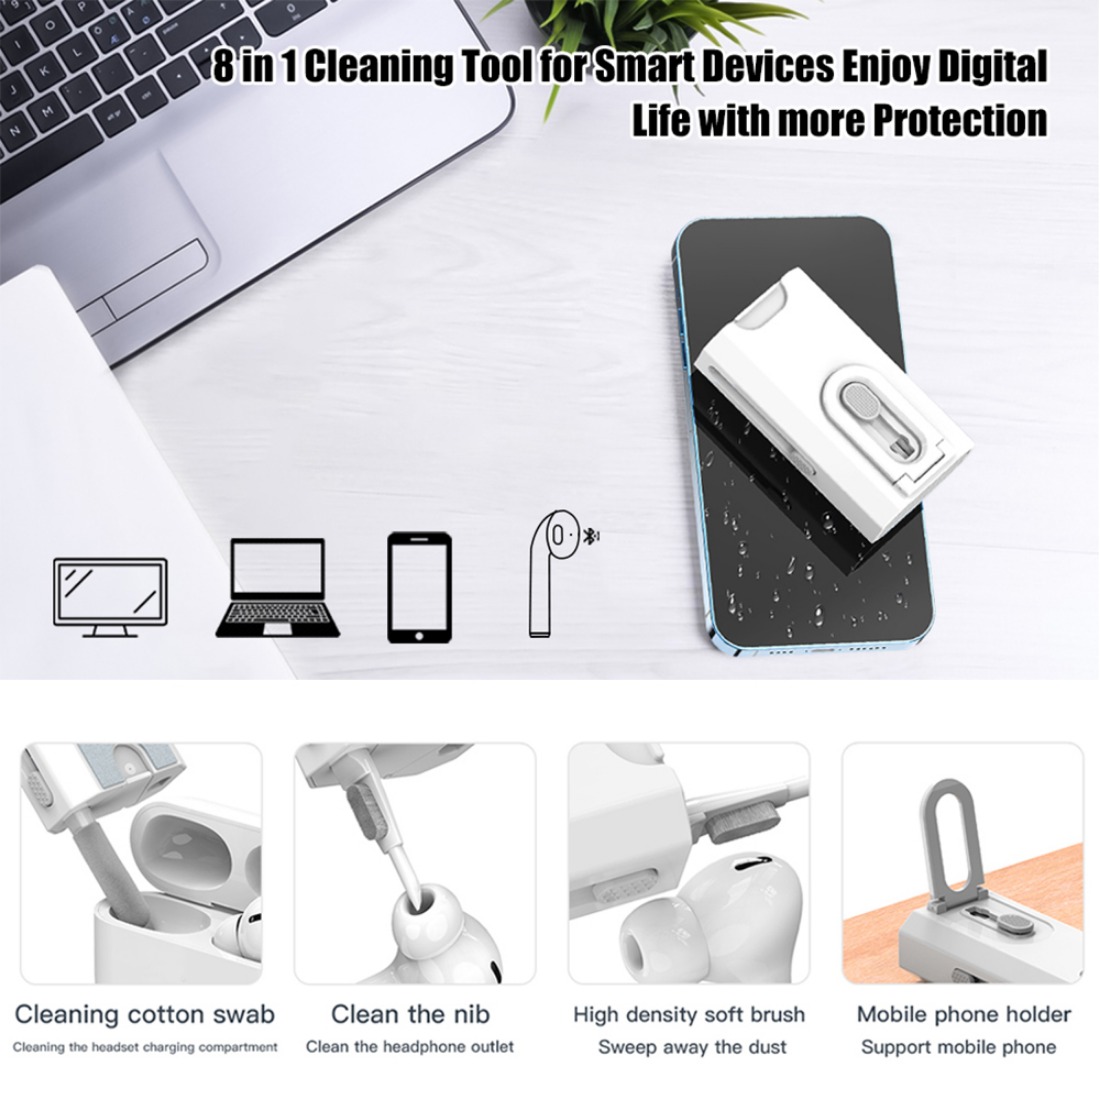 8-in-1 Electronics Cleaner Kit, Laptop Cleaner Keyboard Cleaner